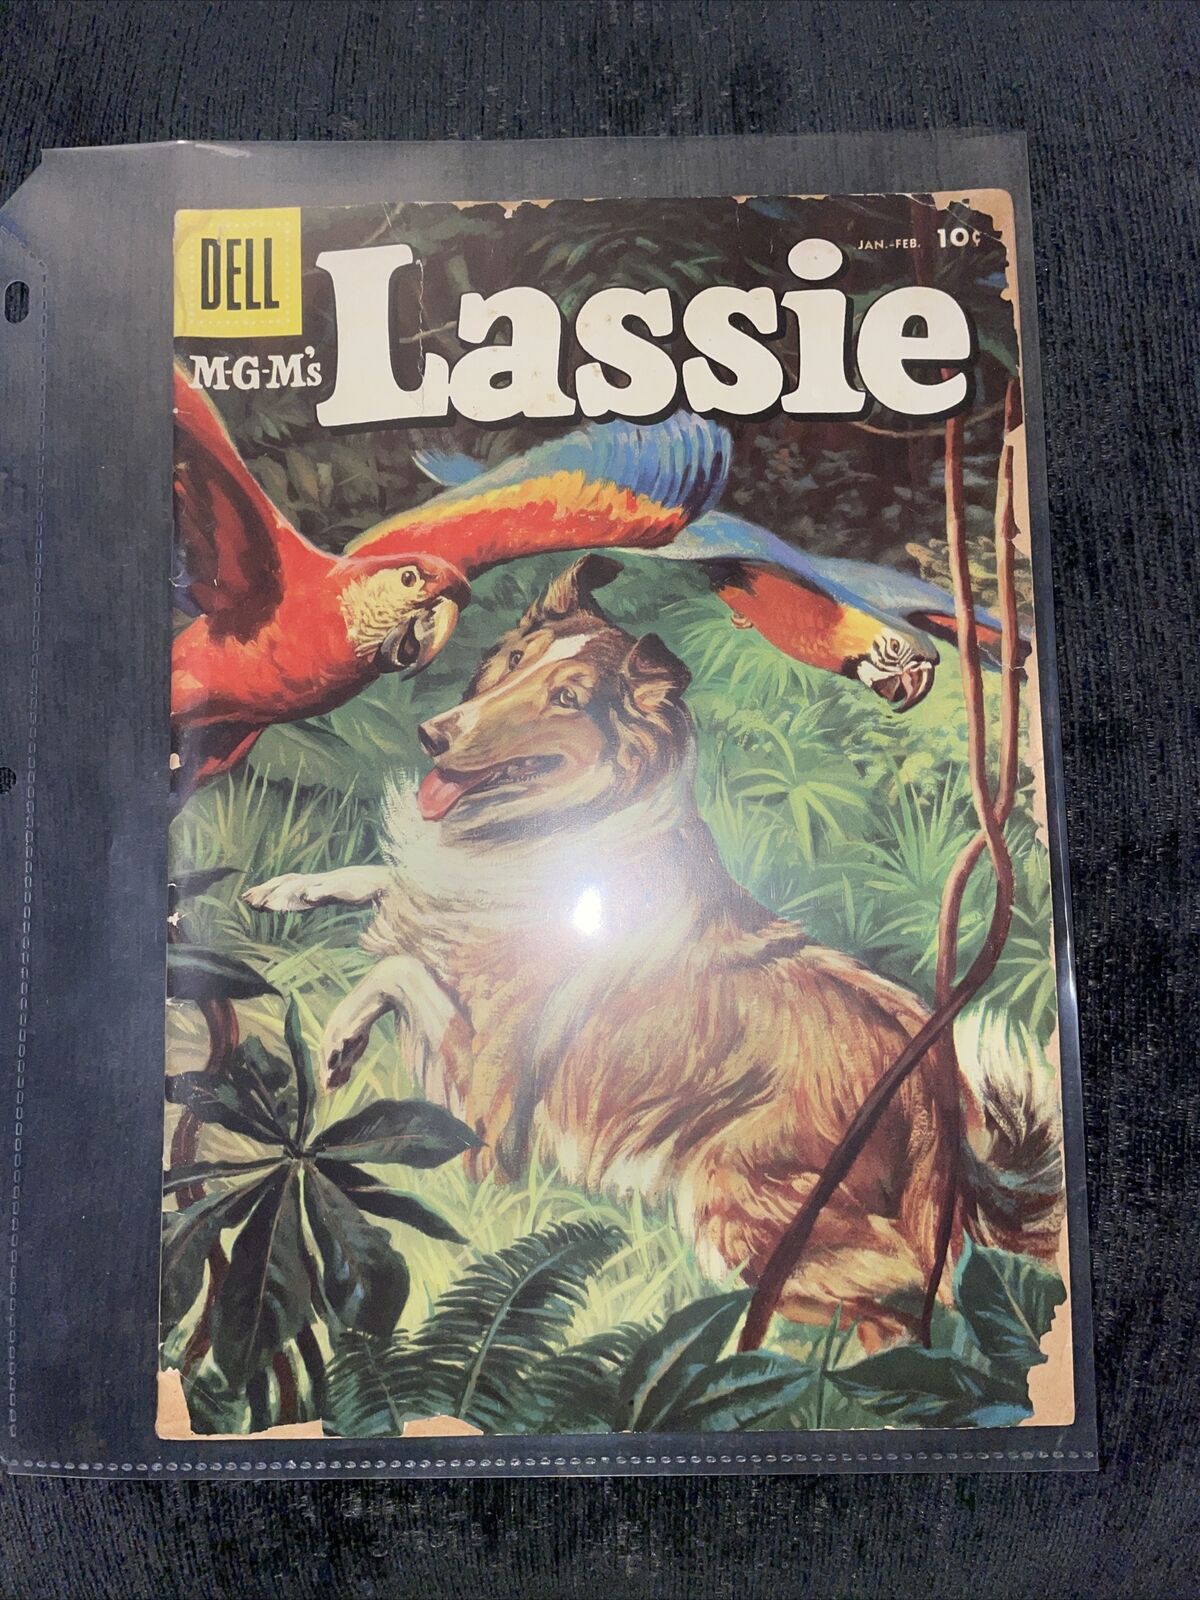 MGM’s LASSIE #32 10c Dell Comics Jan-Feb 1955 TV collie dog and Timmy comic book